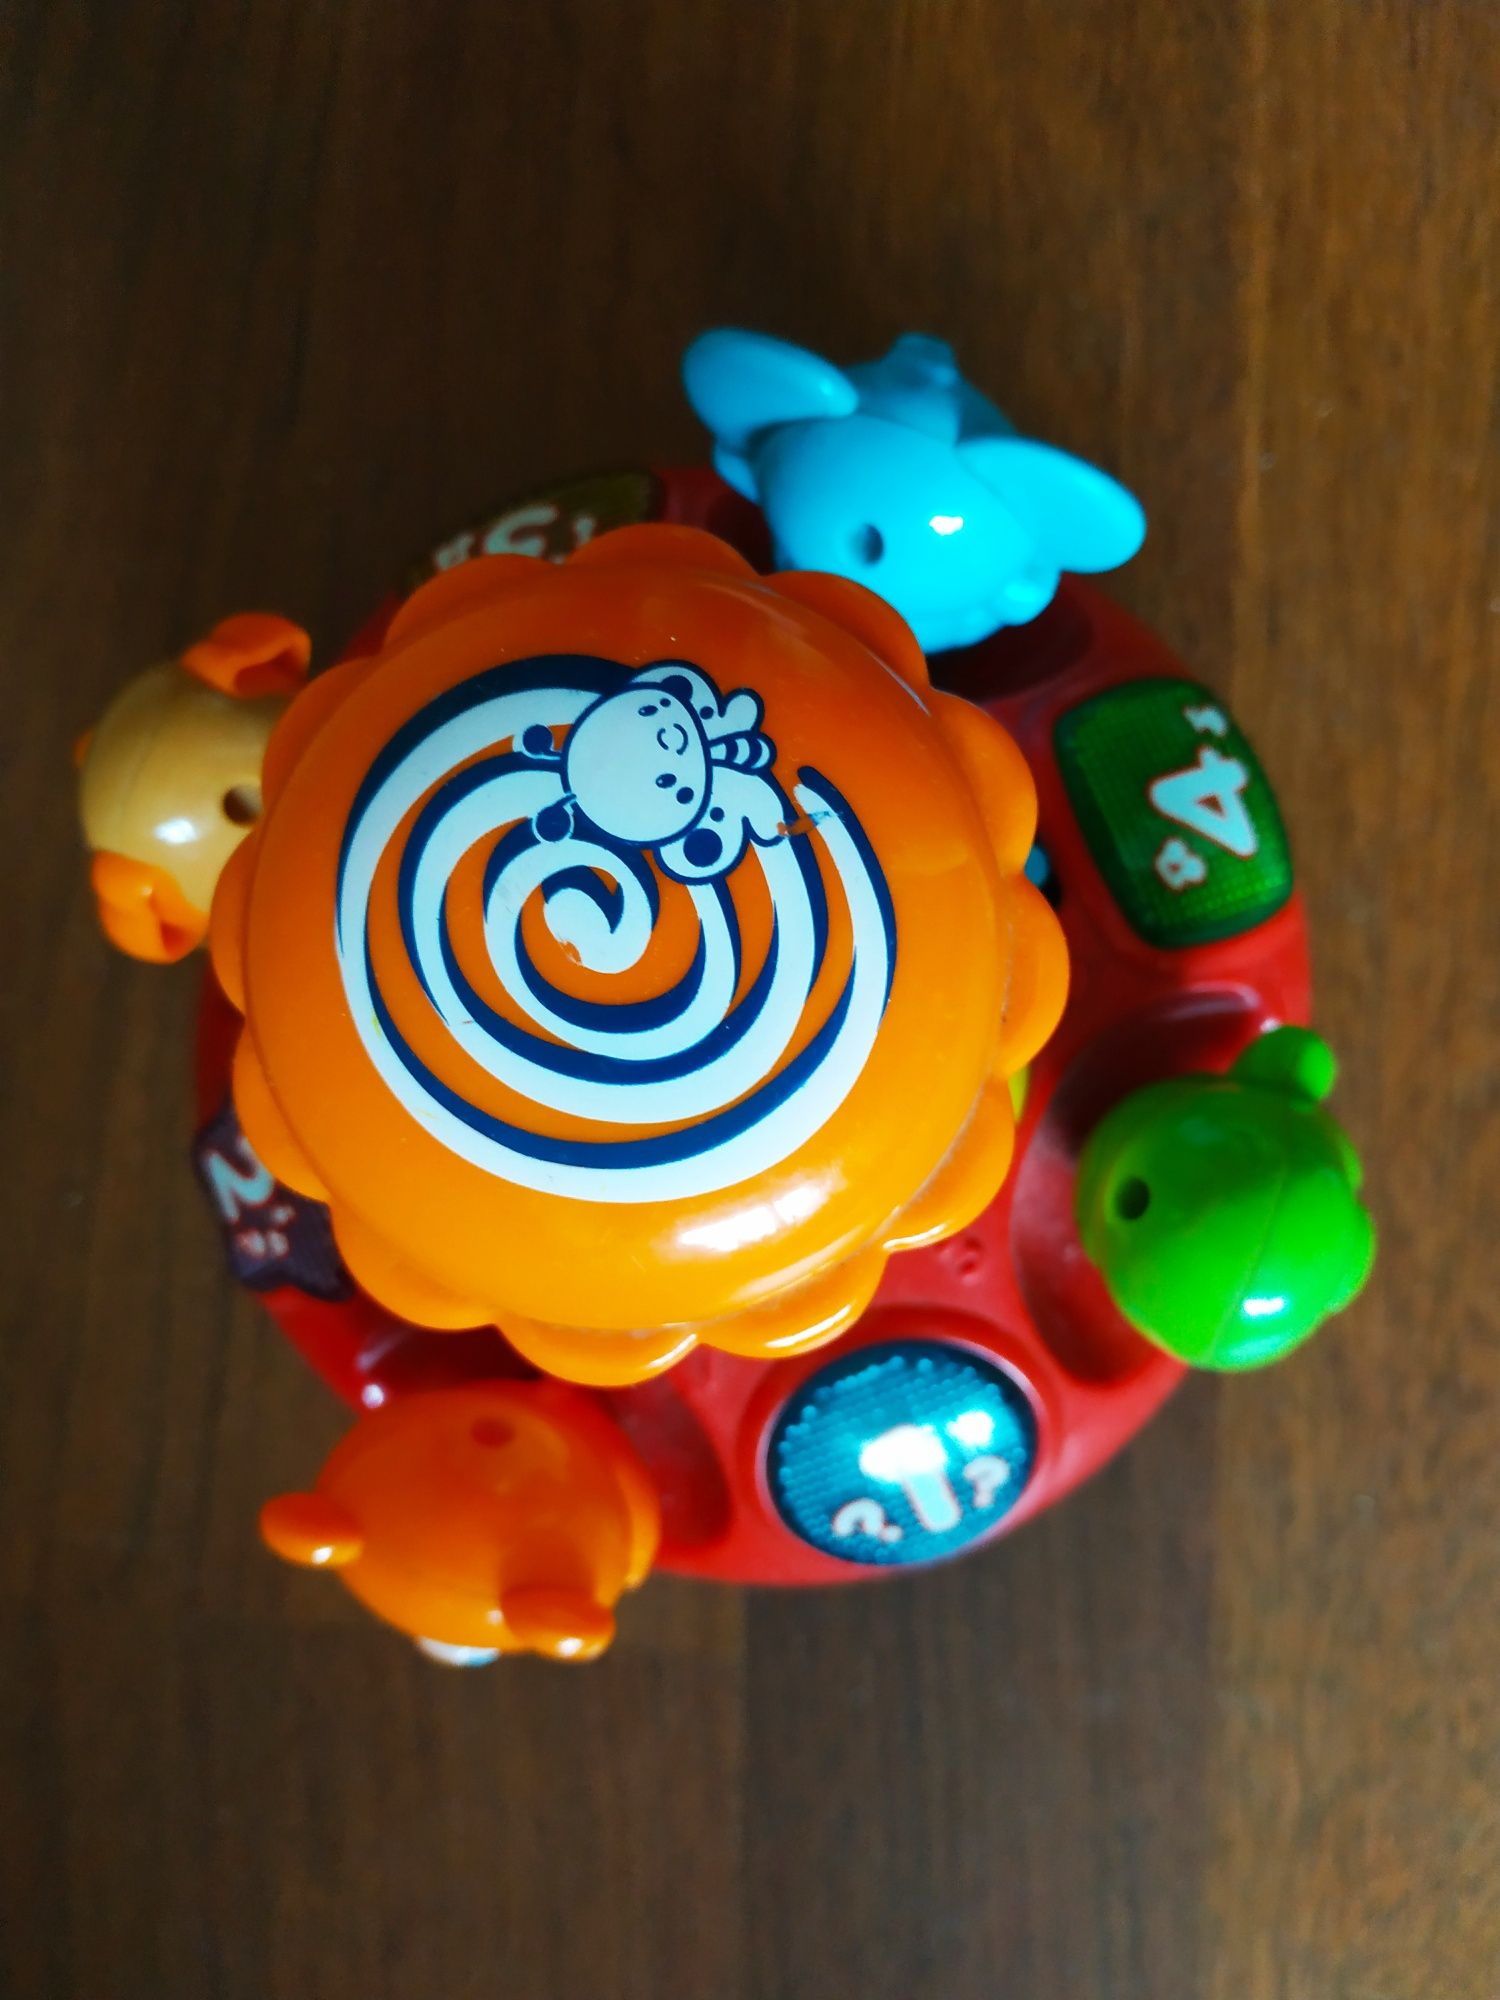 Spinning top toy